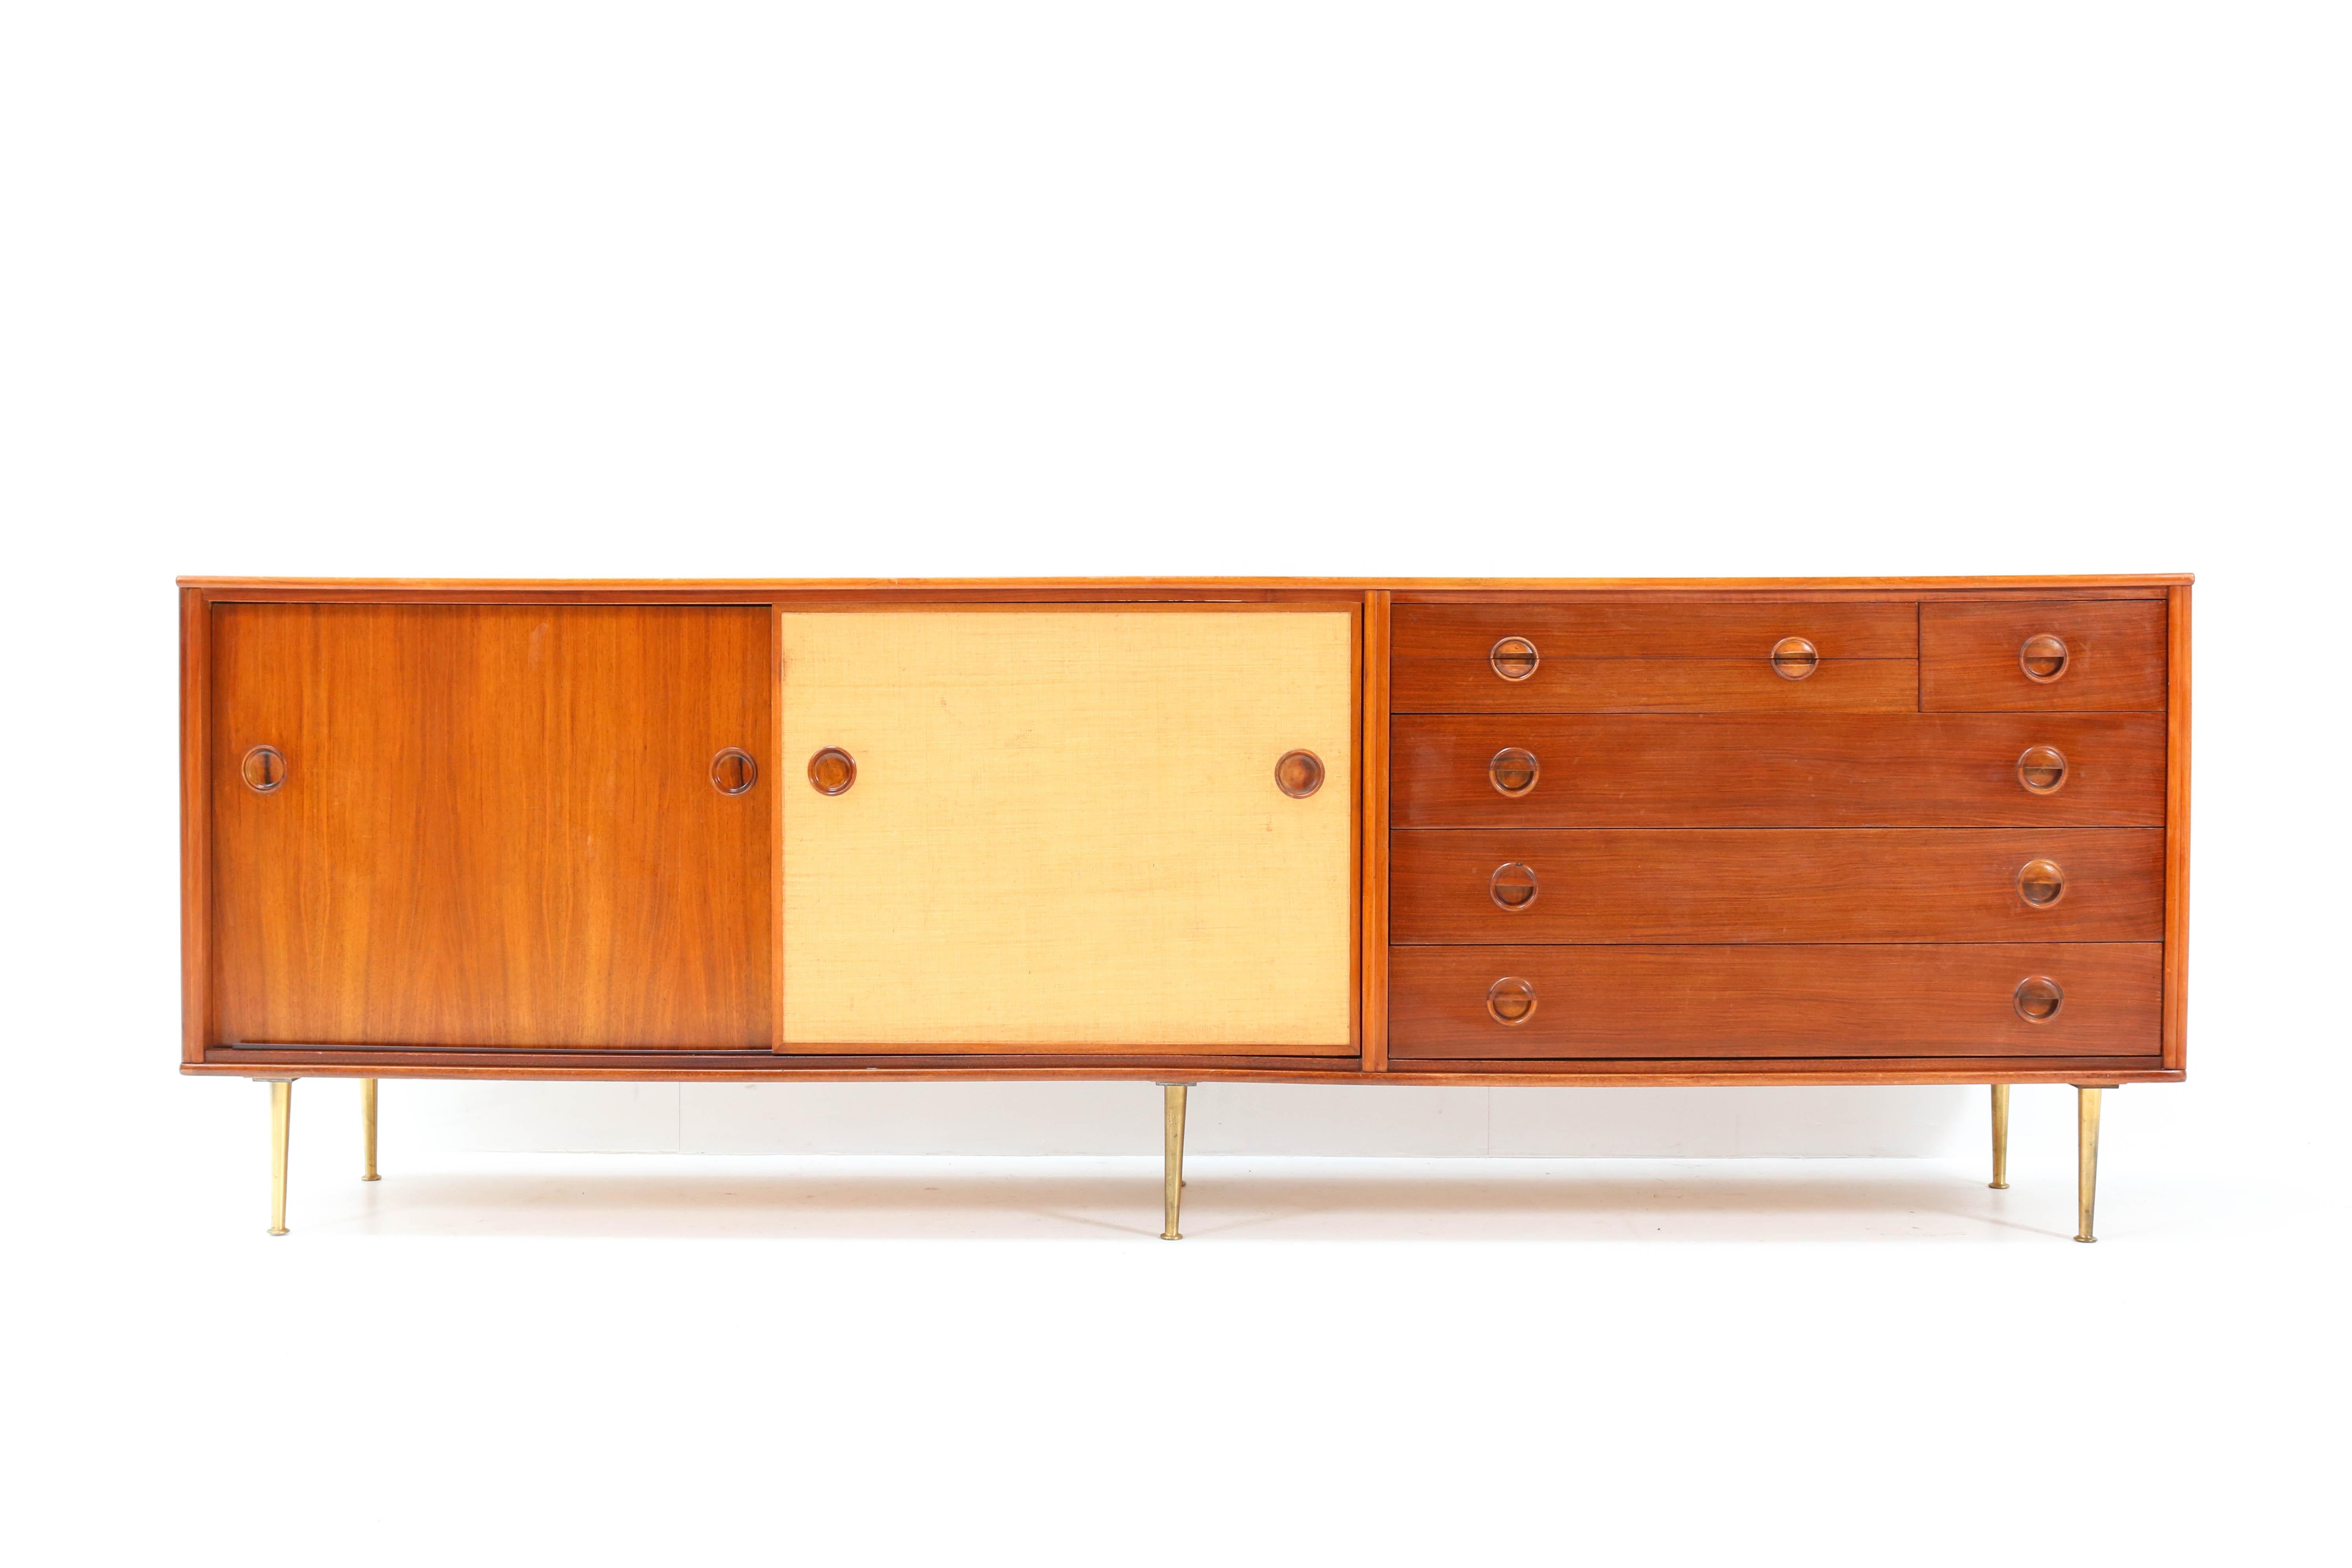 Magnificent and rare Mid-Century Modern credenza or sideboard.
Design by William Watting for Fristho Franeker.
Striking Dutch design from the 1950s.
Solid walnut and solid walnut veneer on brass legs.
One of the two sliding doors is upholstered